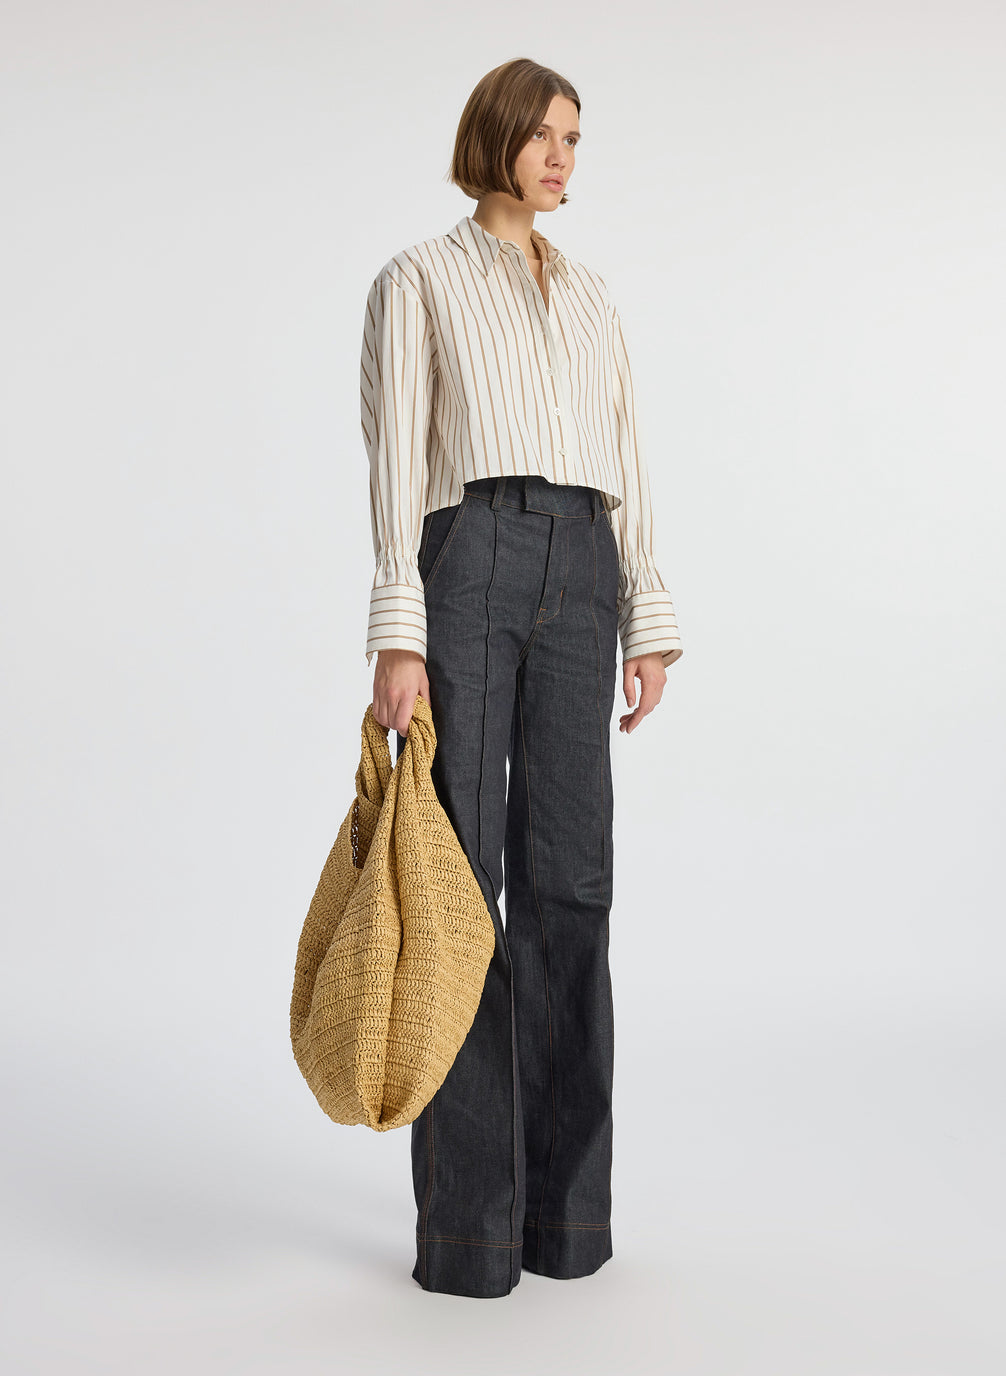 side view of woman wearing cream and brown striped collared shirt and dark wash raw denim jeans